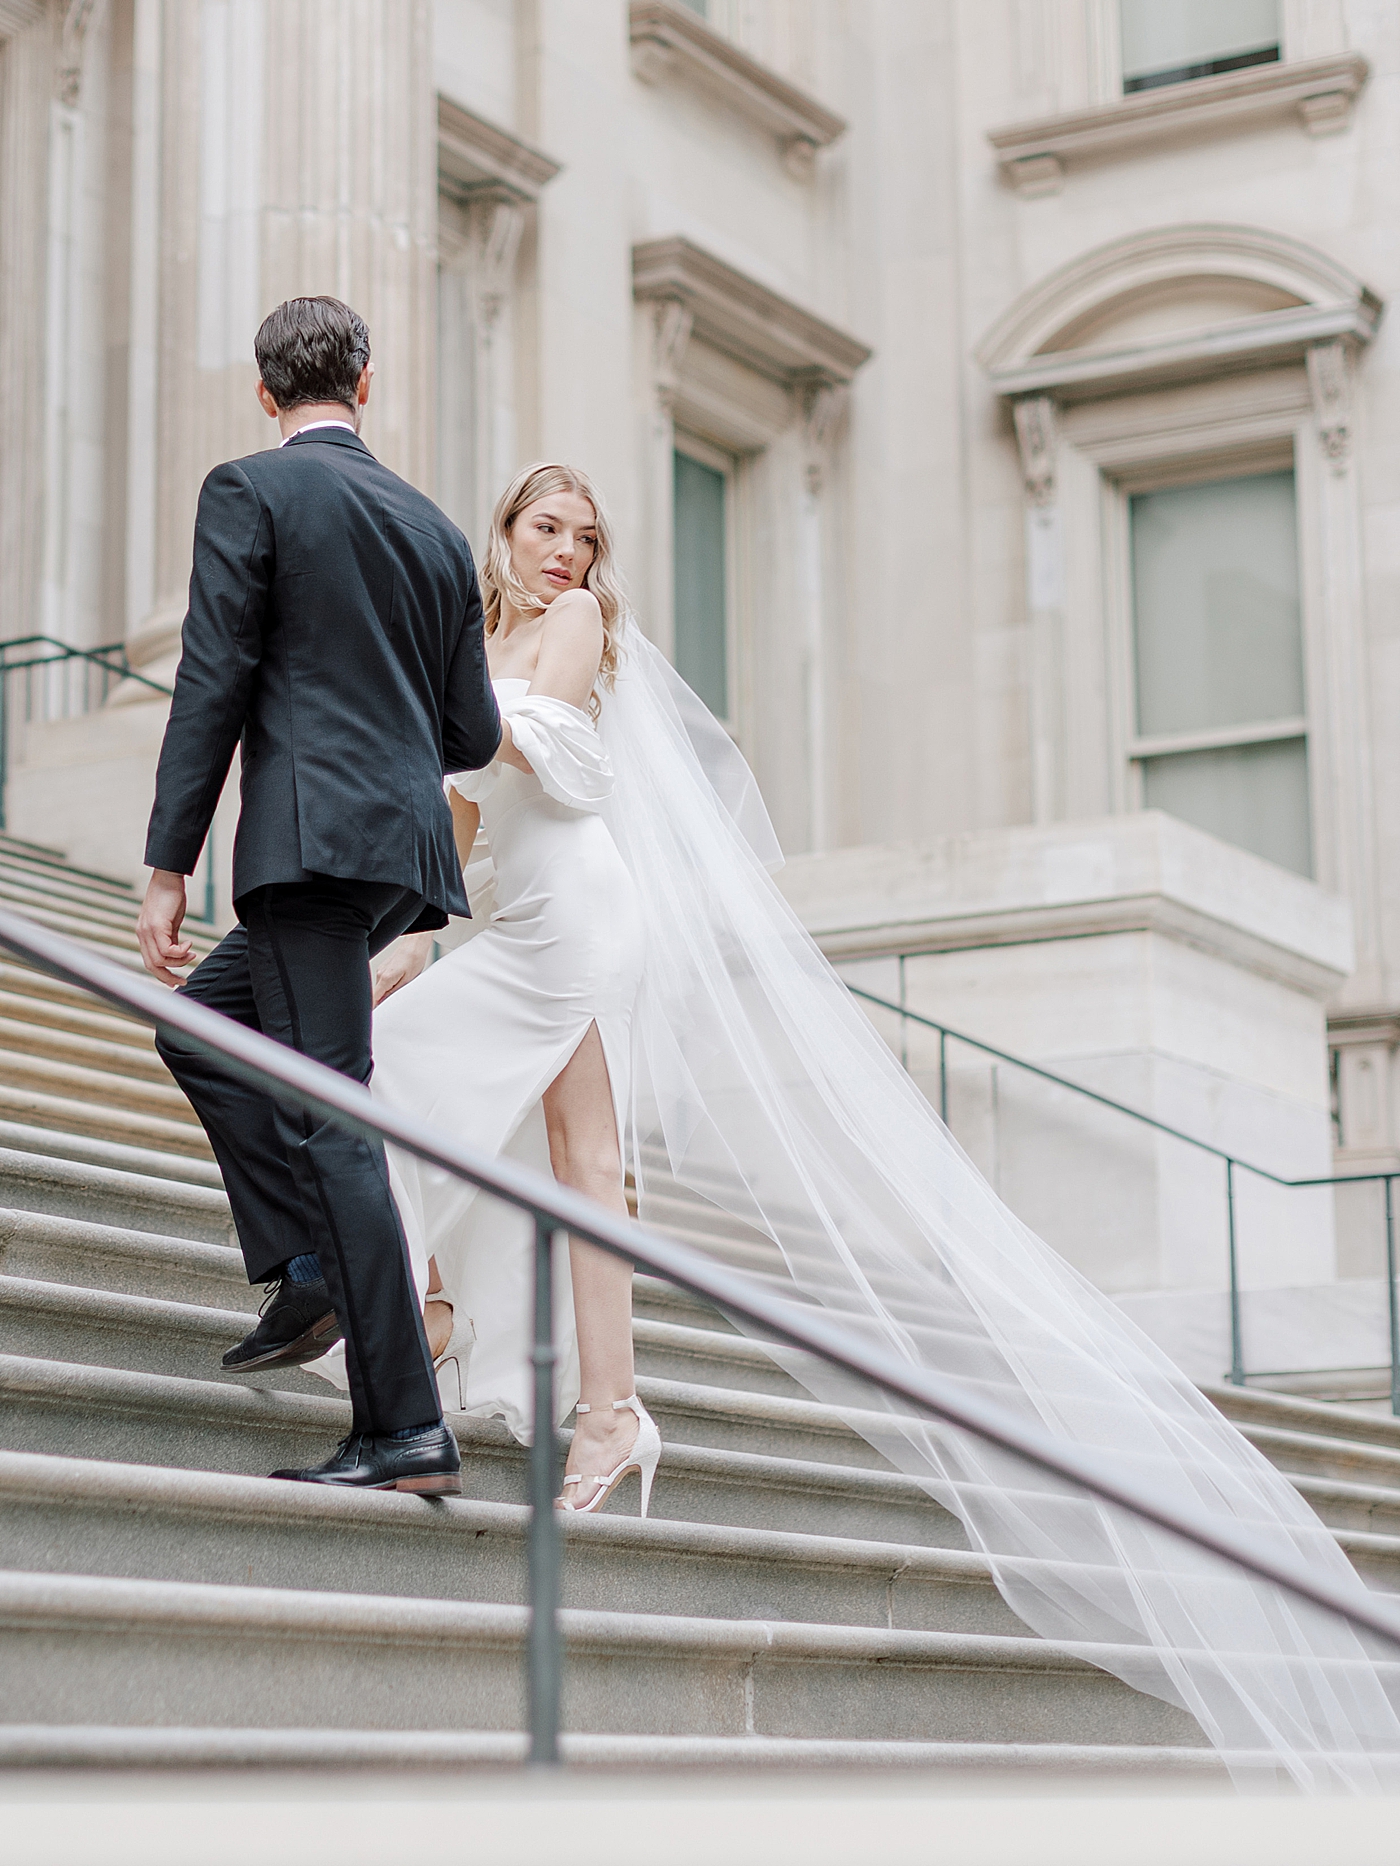 Groom and bride in veil walking up the stairs at The Ritz | Photo by NYC Wedding Photographer Hope Helmuth